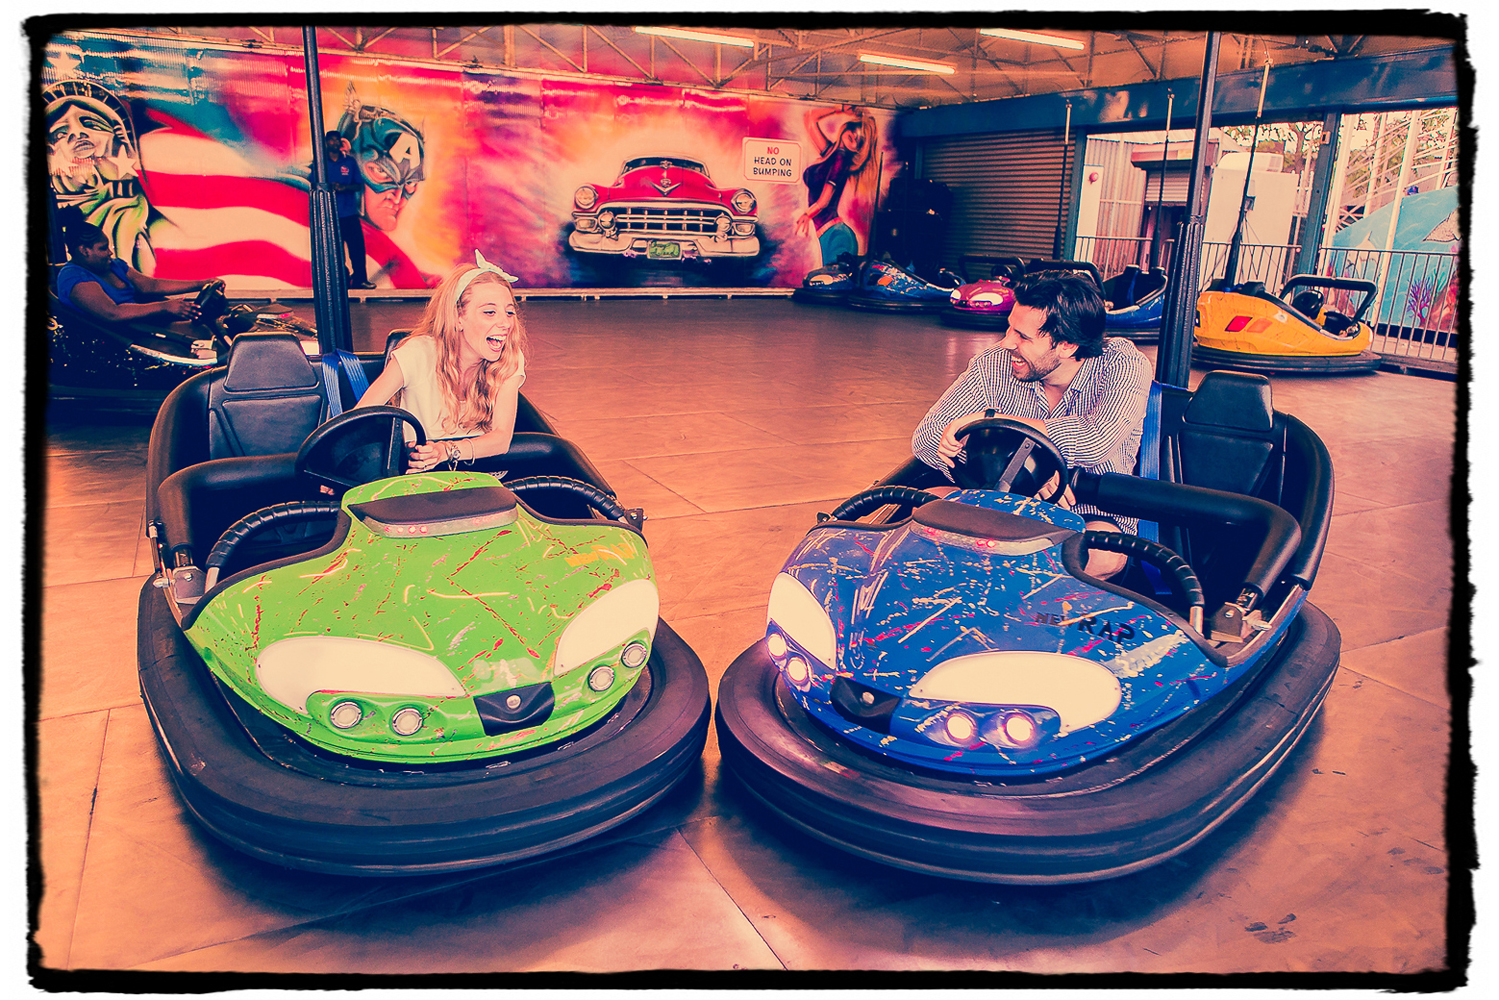 Engagement Portraits: Jaymie & Brad on the bumper cars at Coney Island.